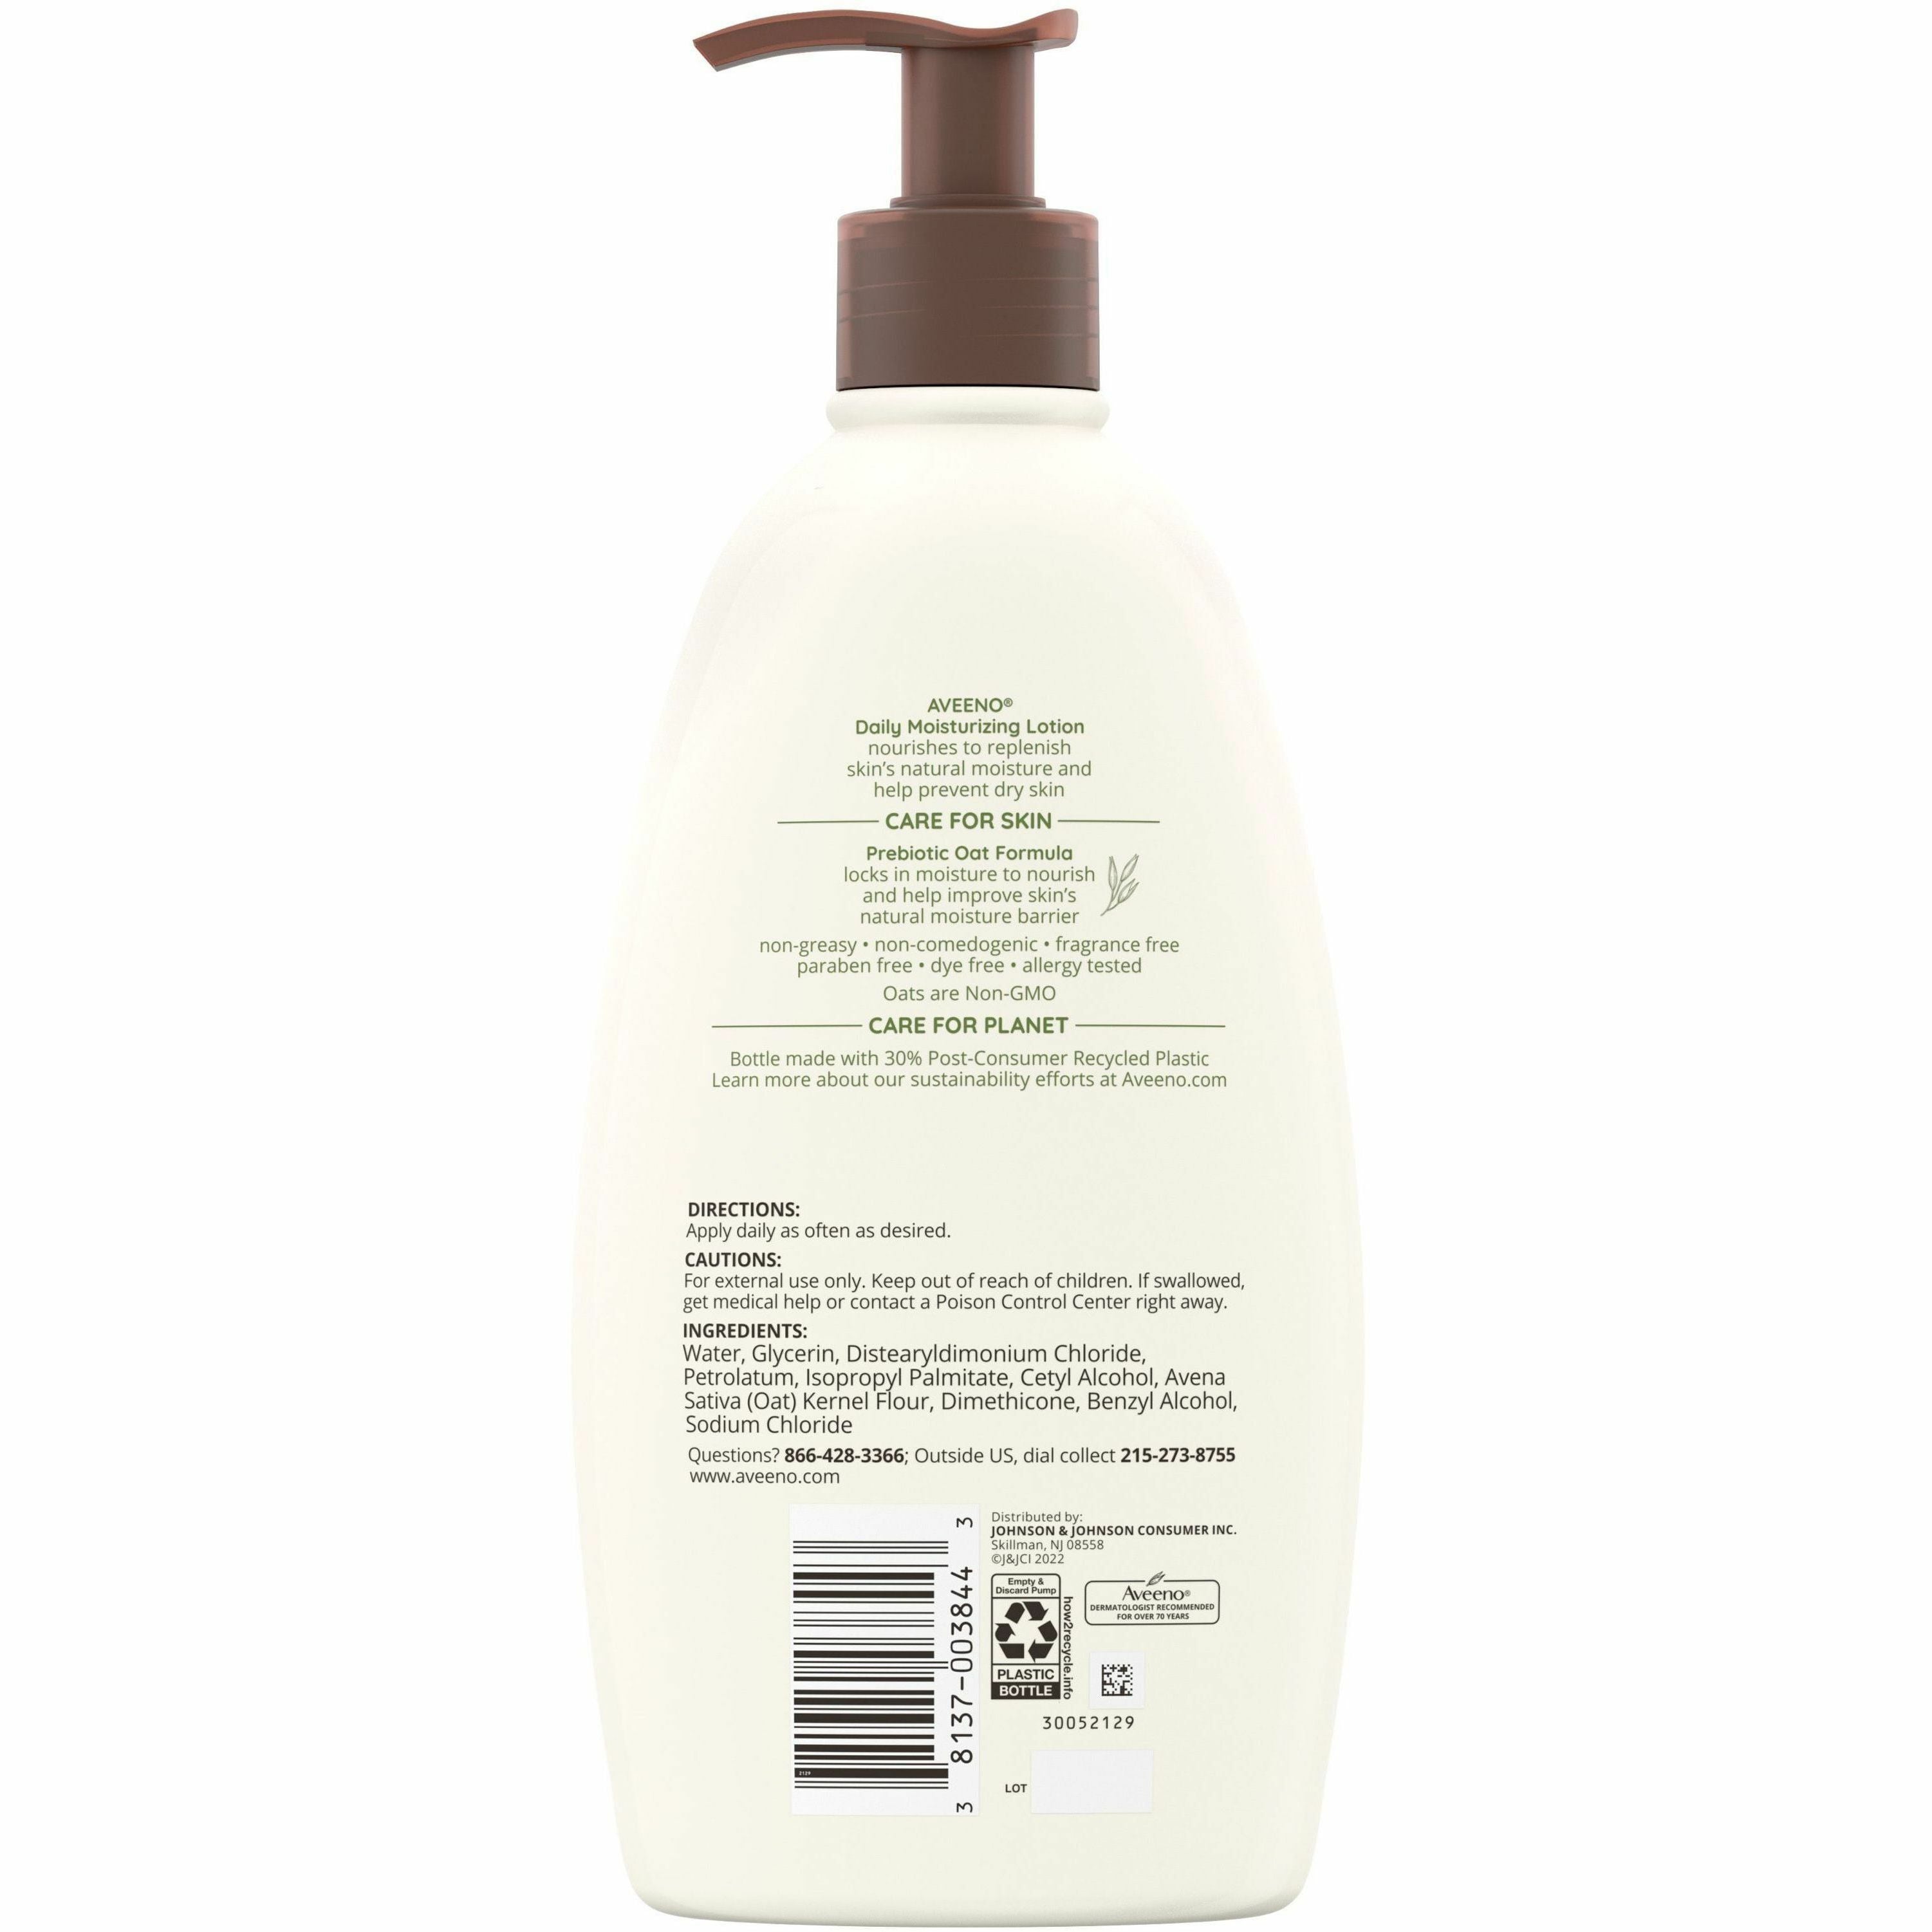 aveeno-daily-moisturizing-body-lotion-lotion-18-fl-oz-for-dry-skin-applicable-on-body-moisturising-fragrance-free-non-greasy-non-comedogenic-soothing-oat-rich-emollients-nourishes-dry-skin-gentle-1-each_joj003844 - 3